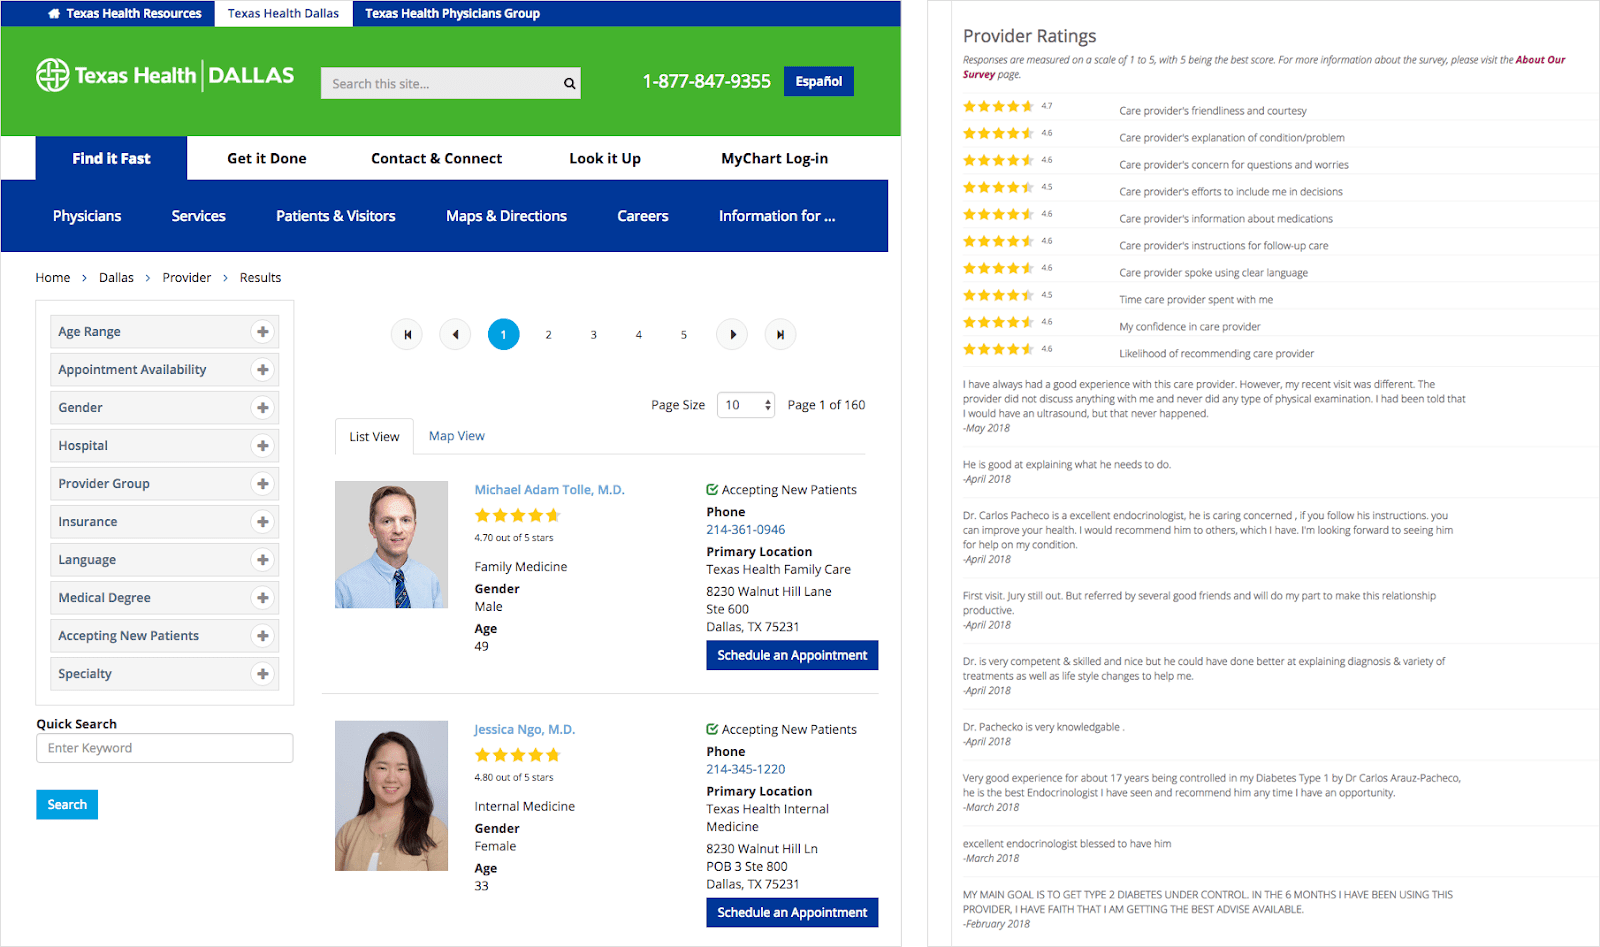 Texas Health Dallas uses star-ratings on their search results pages and doctor bio webpages